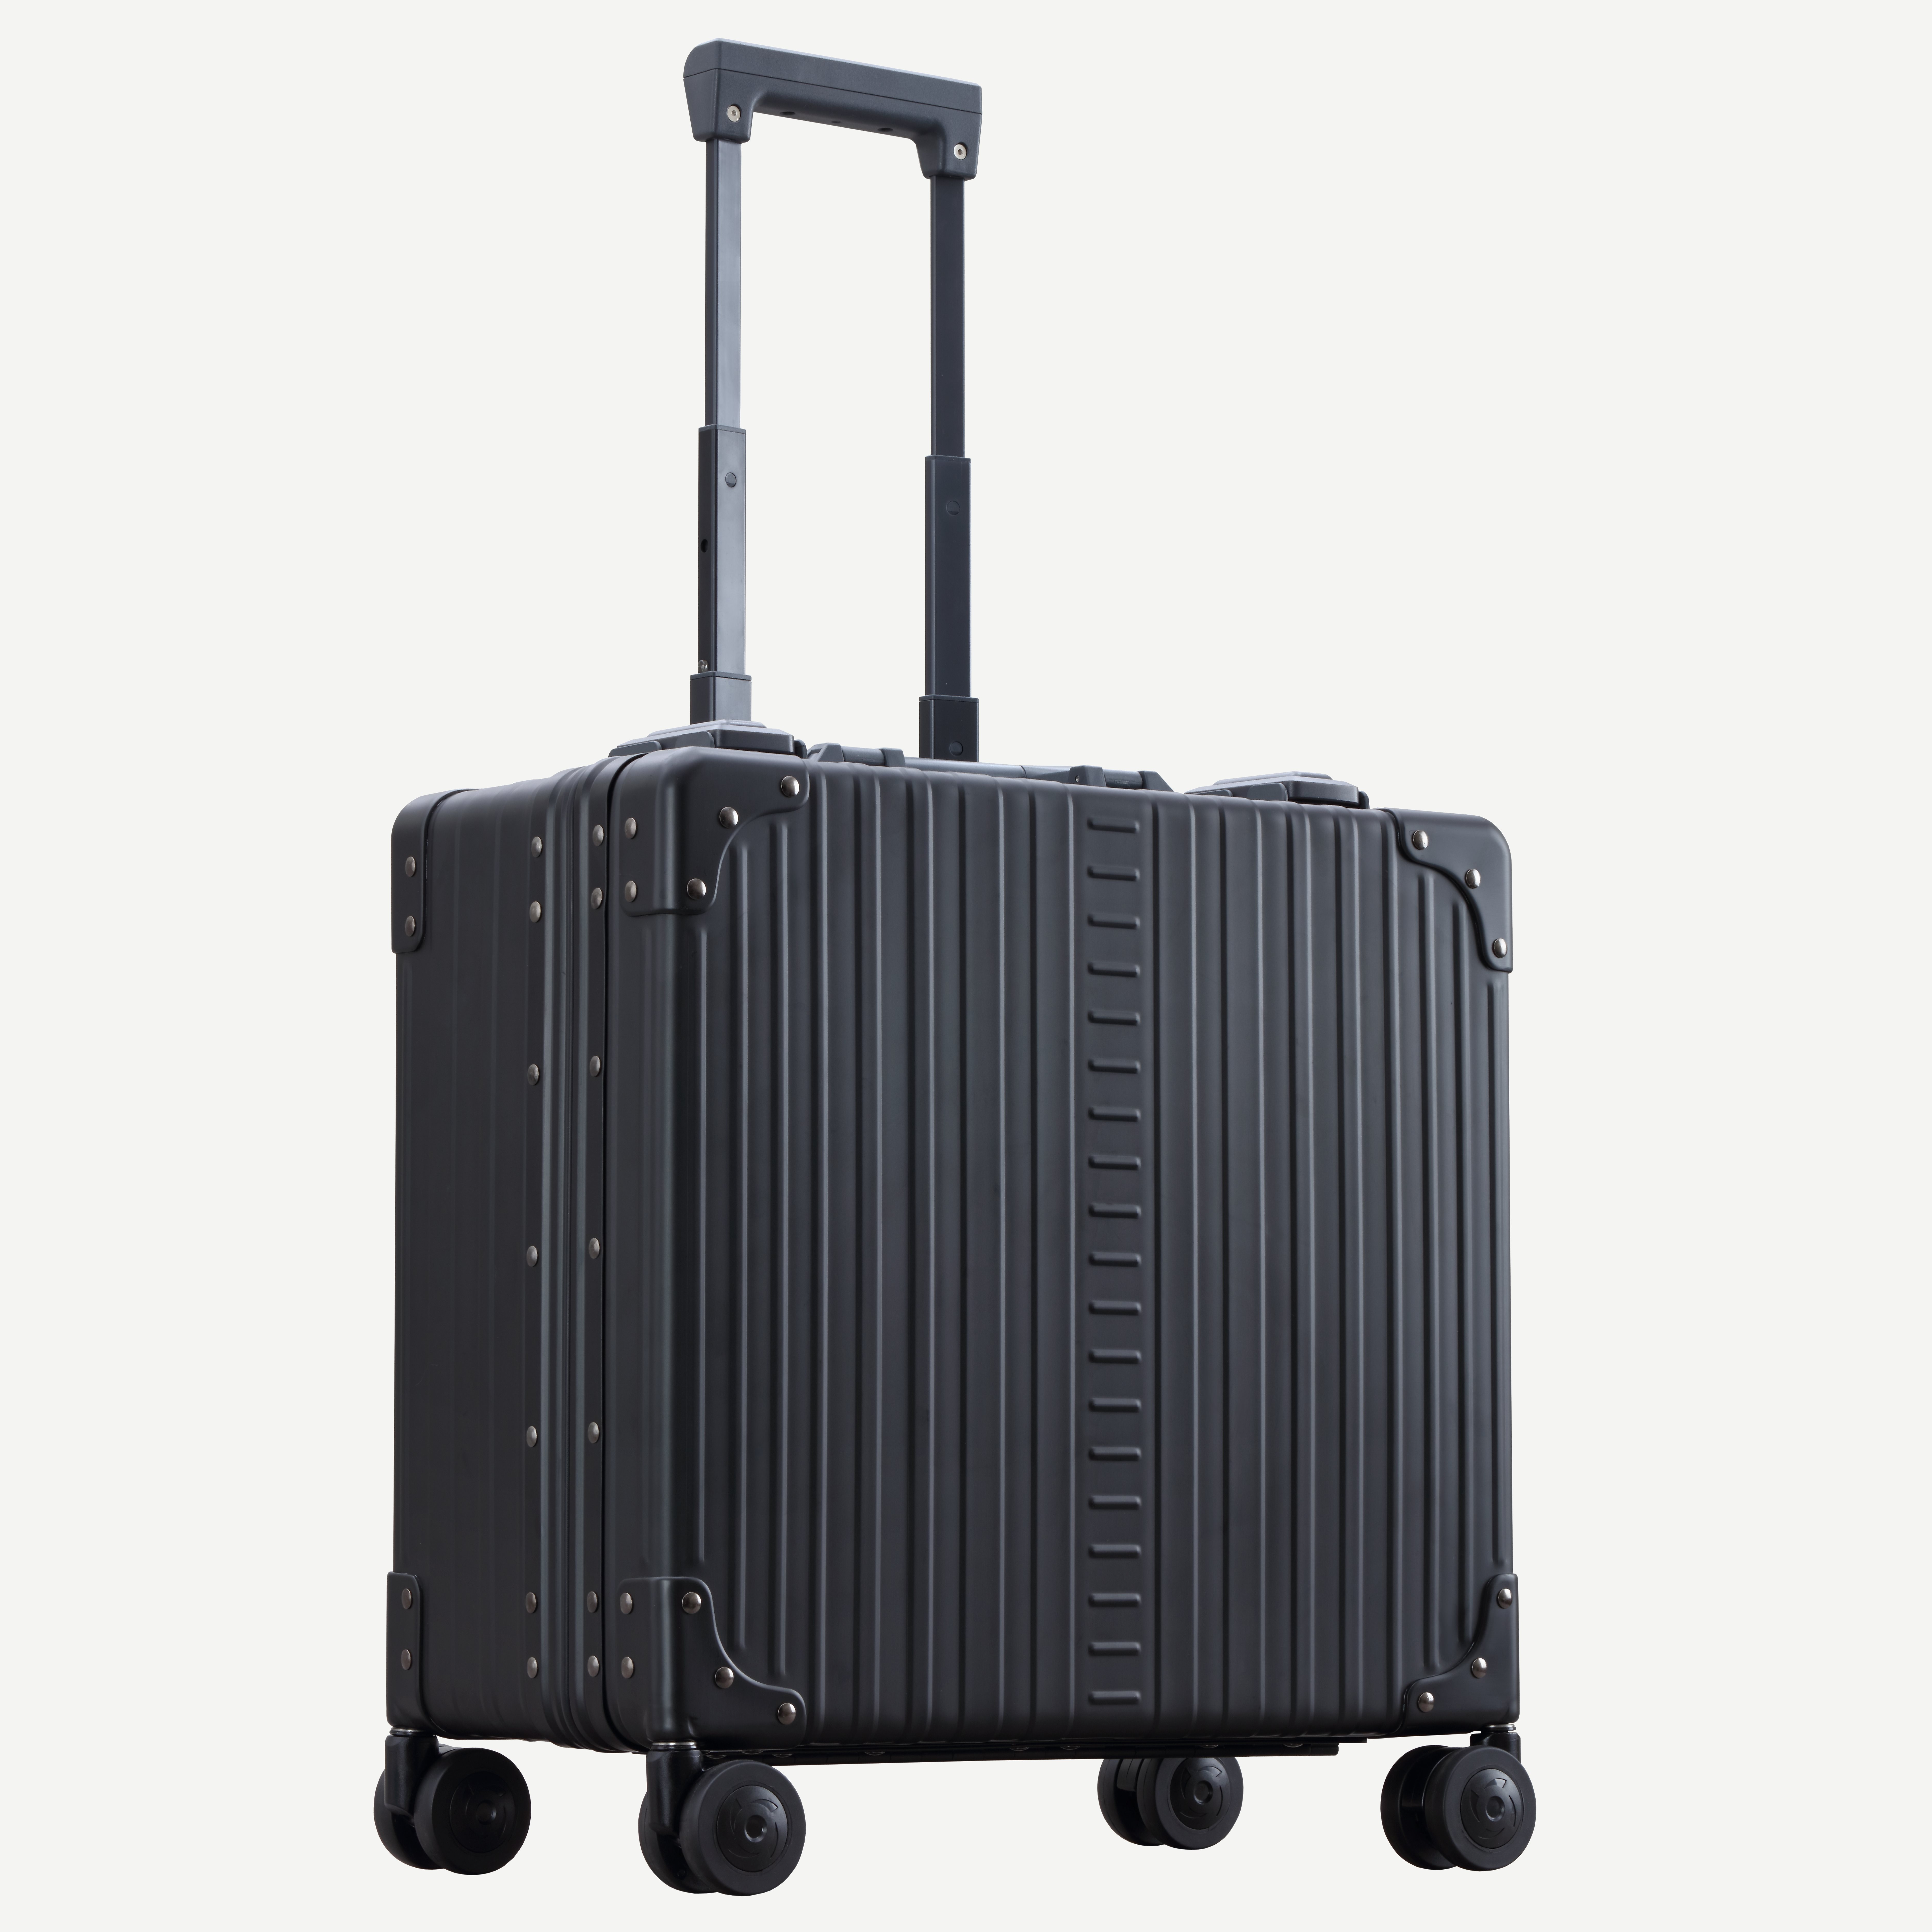 Aleon suitcase | » Buy exclusive suitcases and bags from Aleon